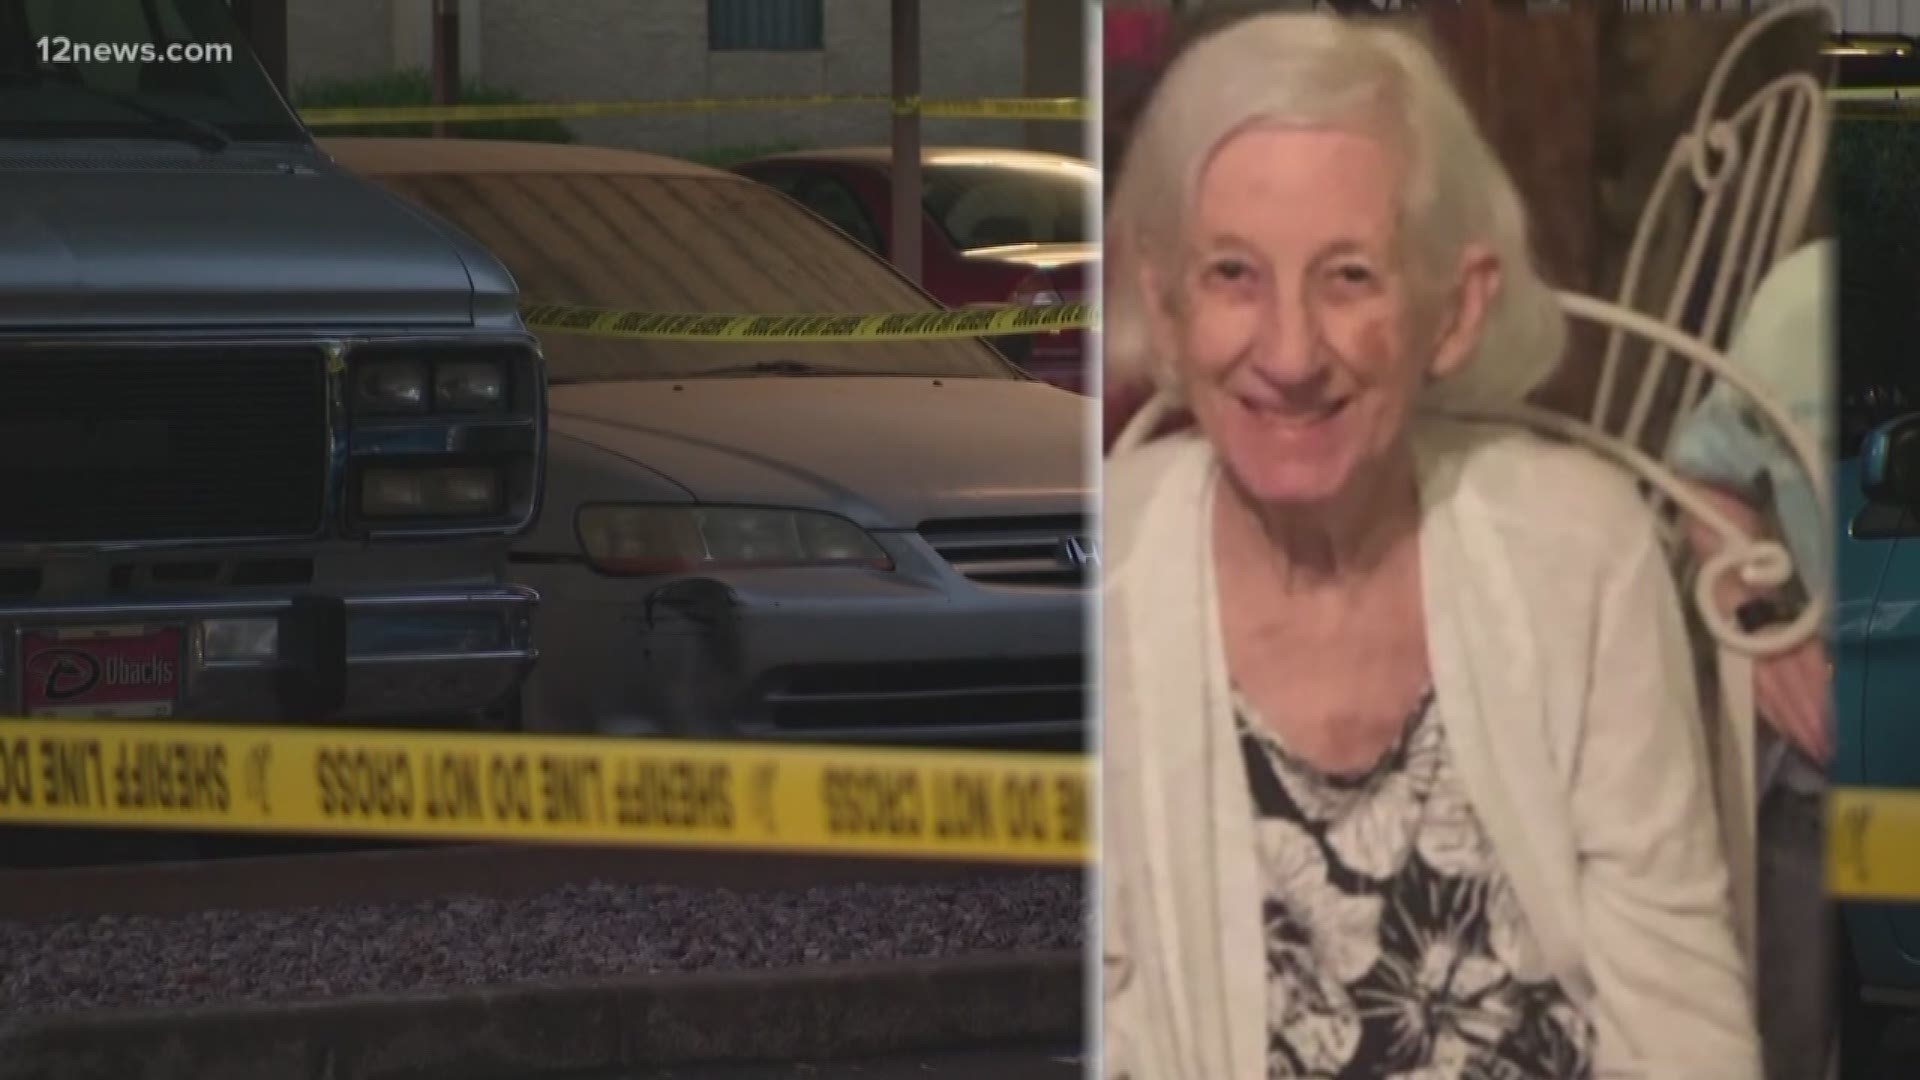 The woman's sister reported her missing Sunday at the apartment complex where her body was found Friday.